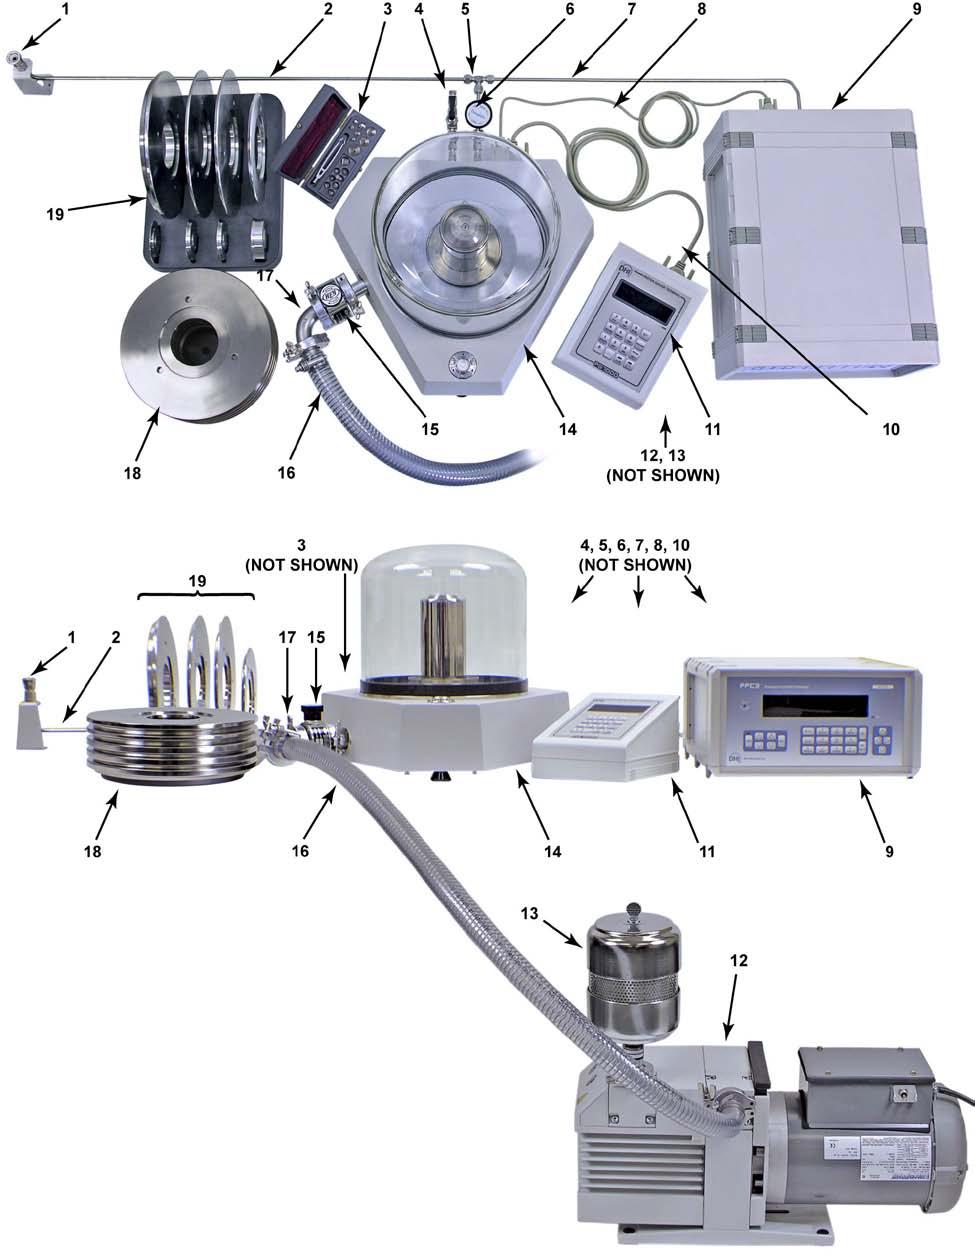 PG7601-SYS-AF OPERATION AND MAINTENANCE MANUAL 1. DUT quick connector on stand 2. Tube, DUT connector to tee 3. Trim mass set 4. Vacuum vent valve 5. Tee 6. Platform shutoff valve assembly 7.